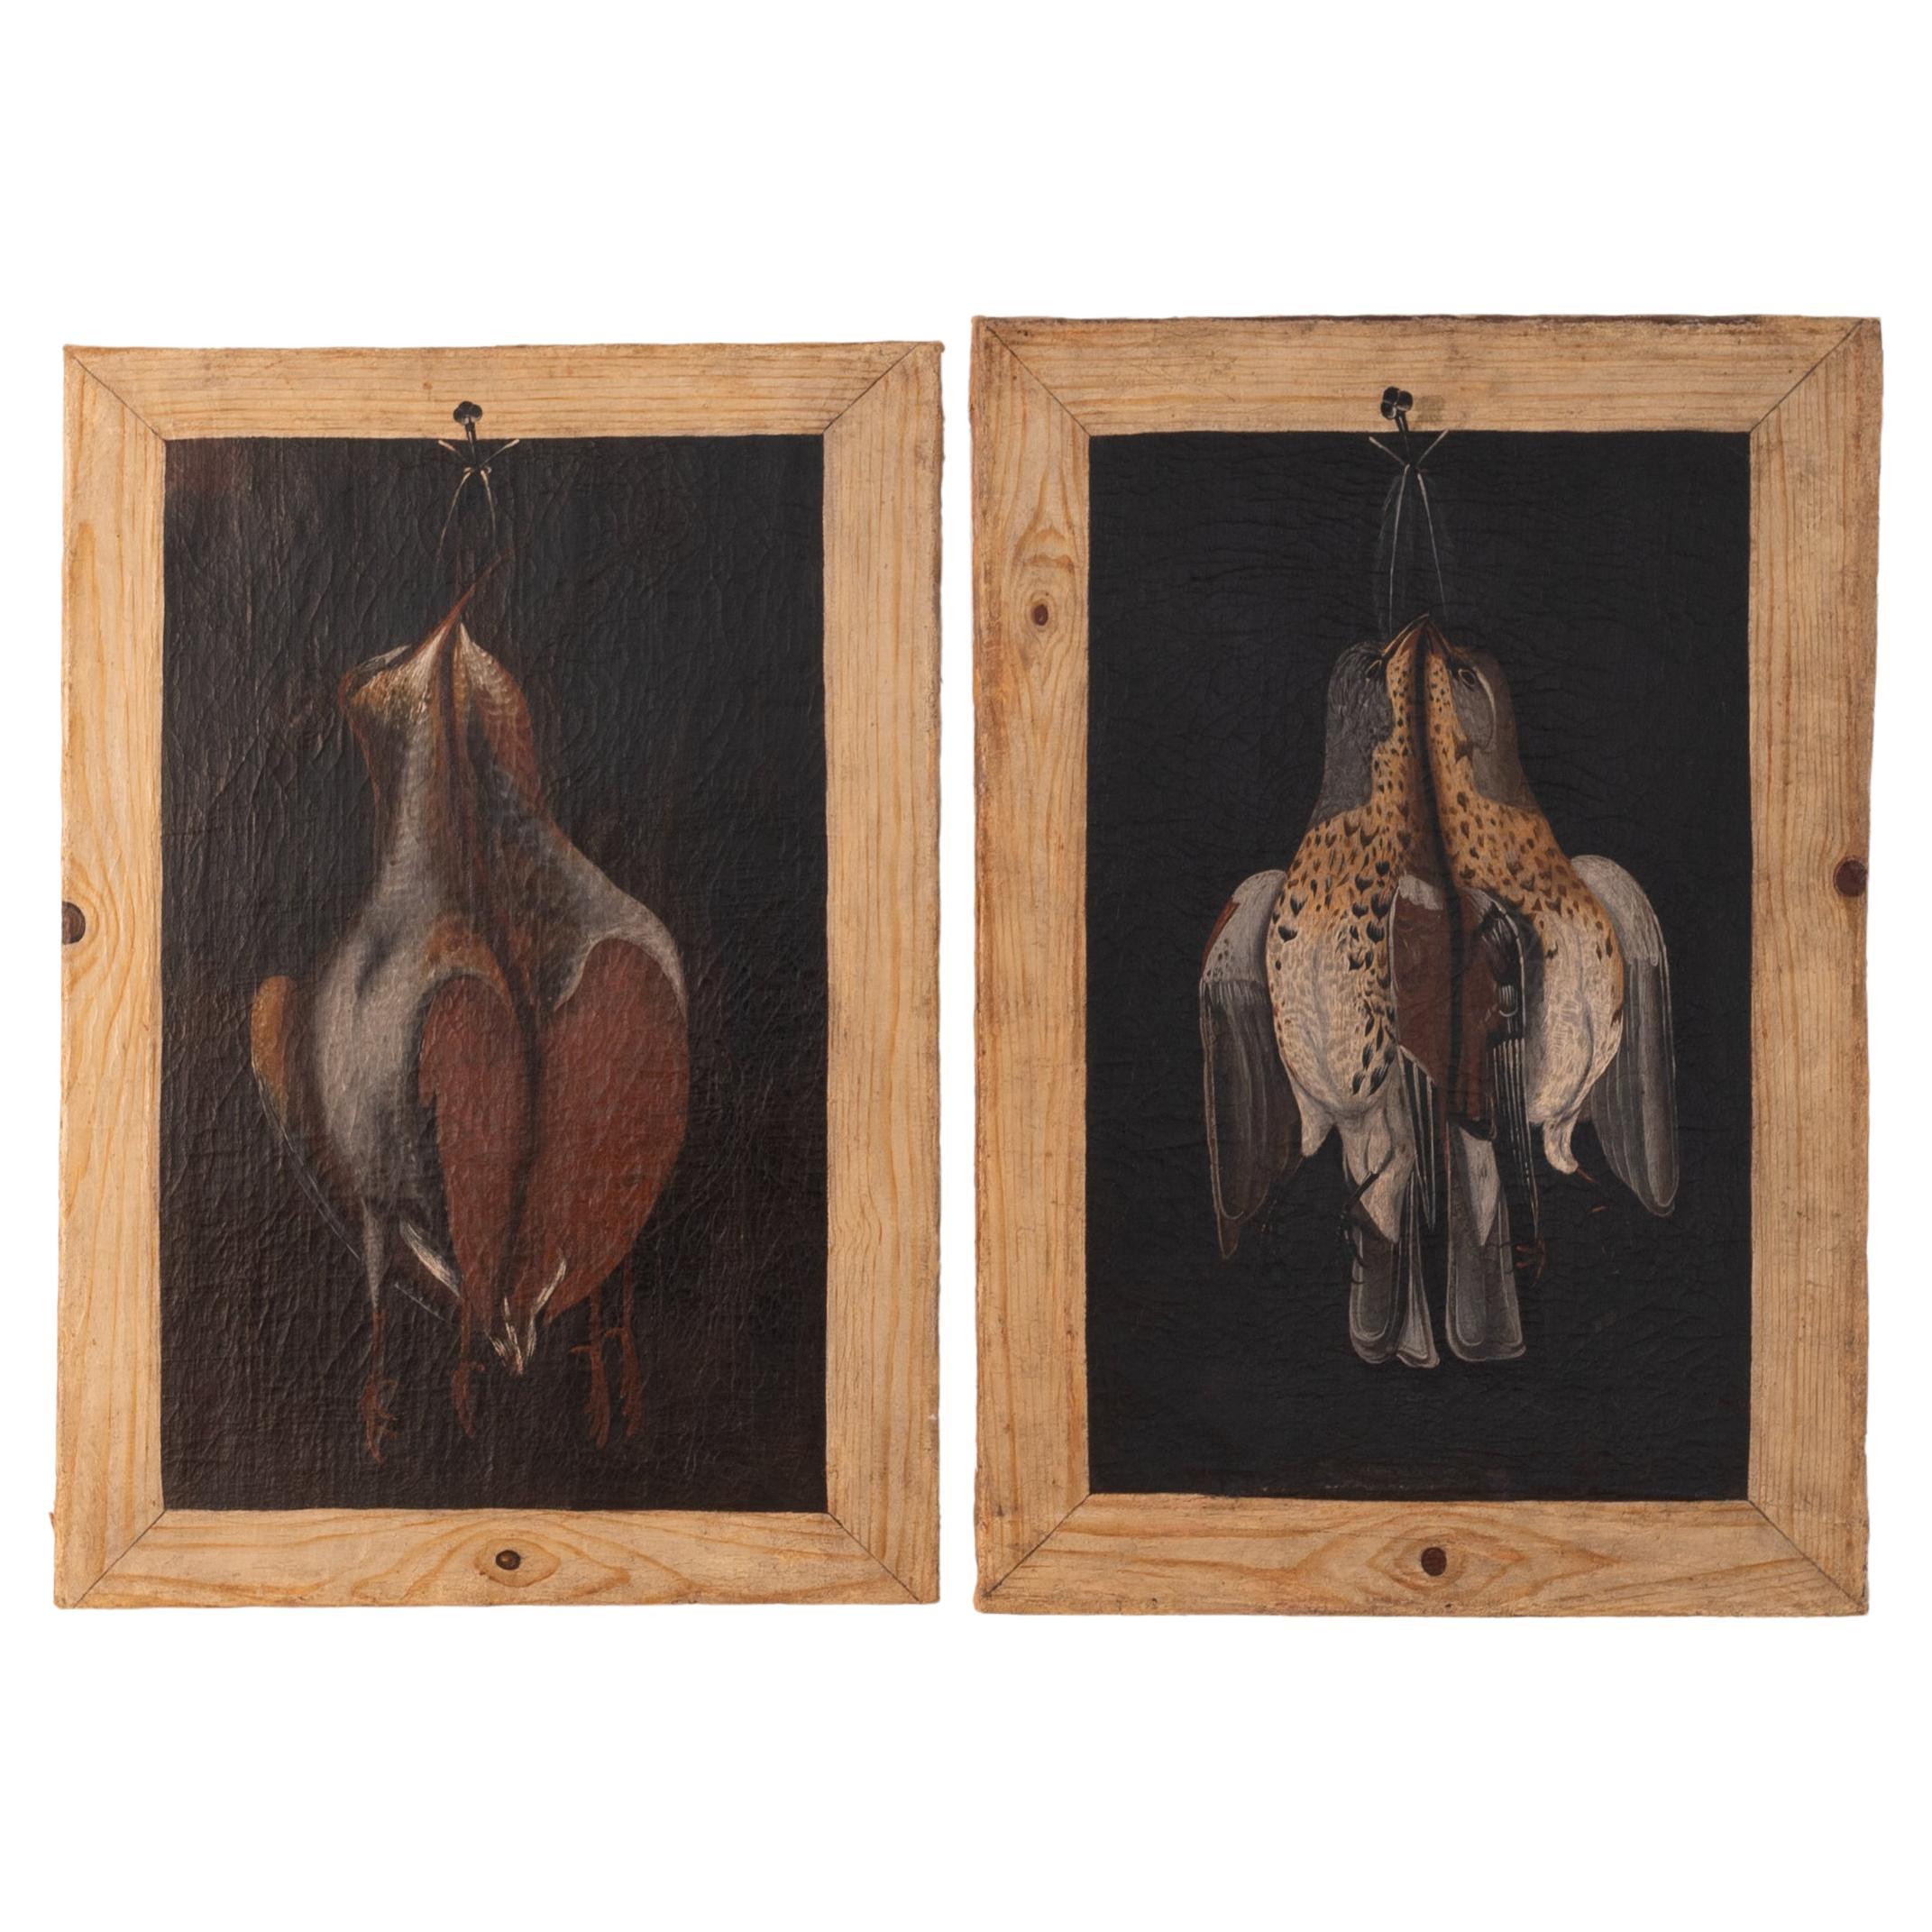 Set of 2 19th Century Trompe L'oeuil Paintings. Still Life with Dead Game